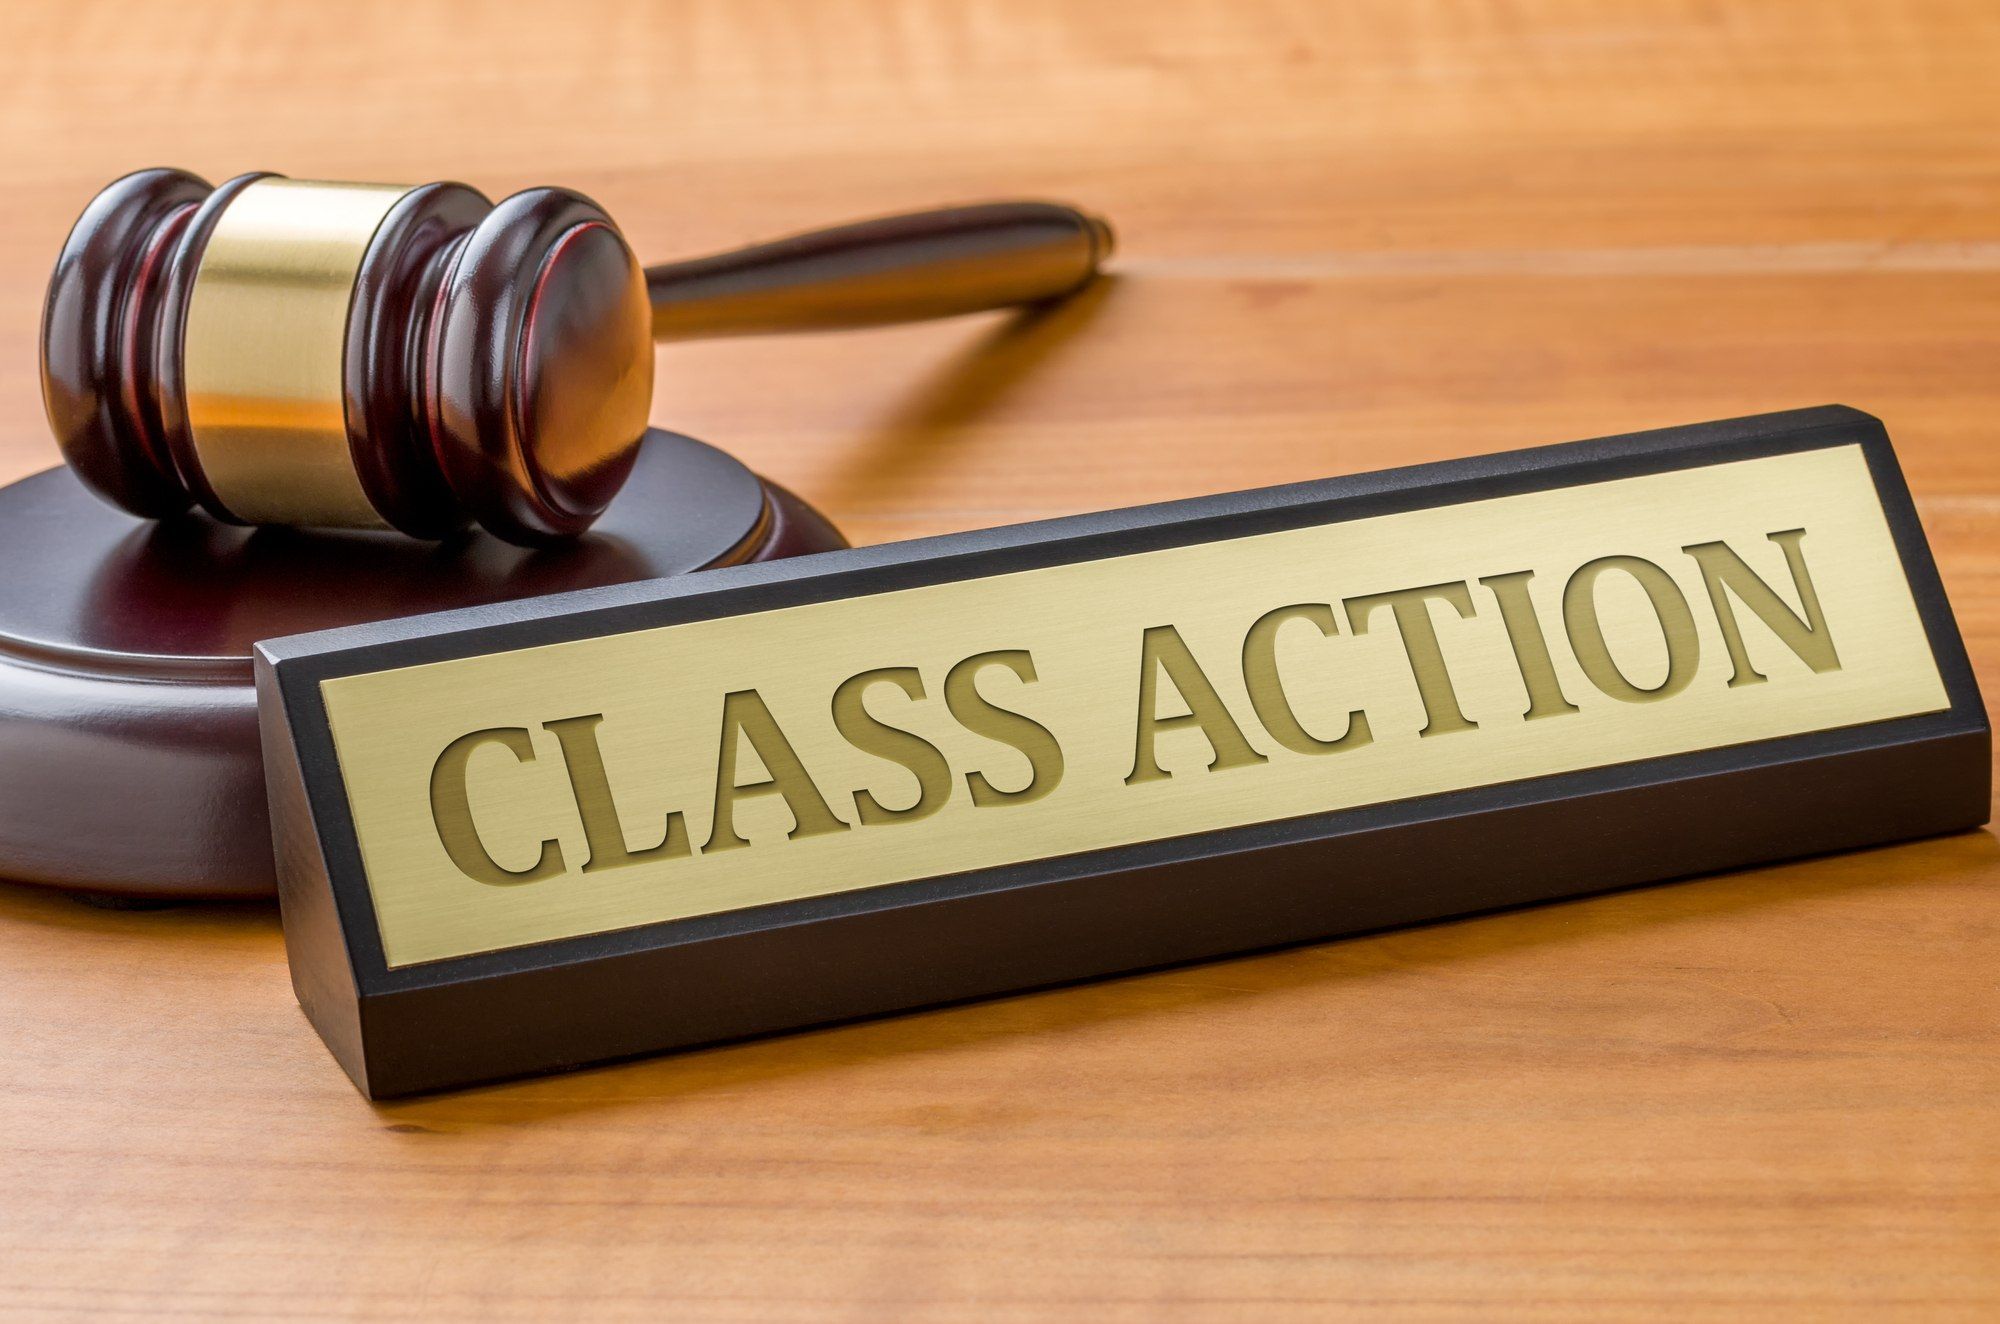 10 Class-Action Lawsuits With March Deadlines That Could Make You